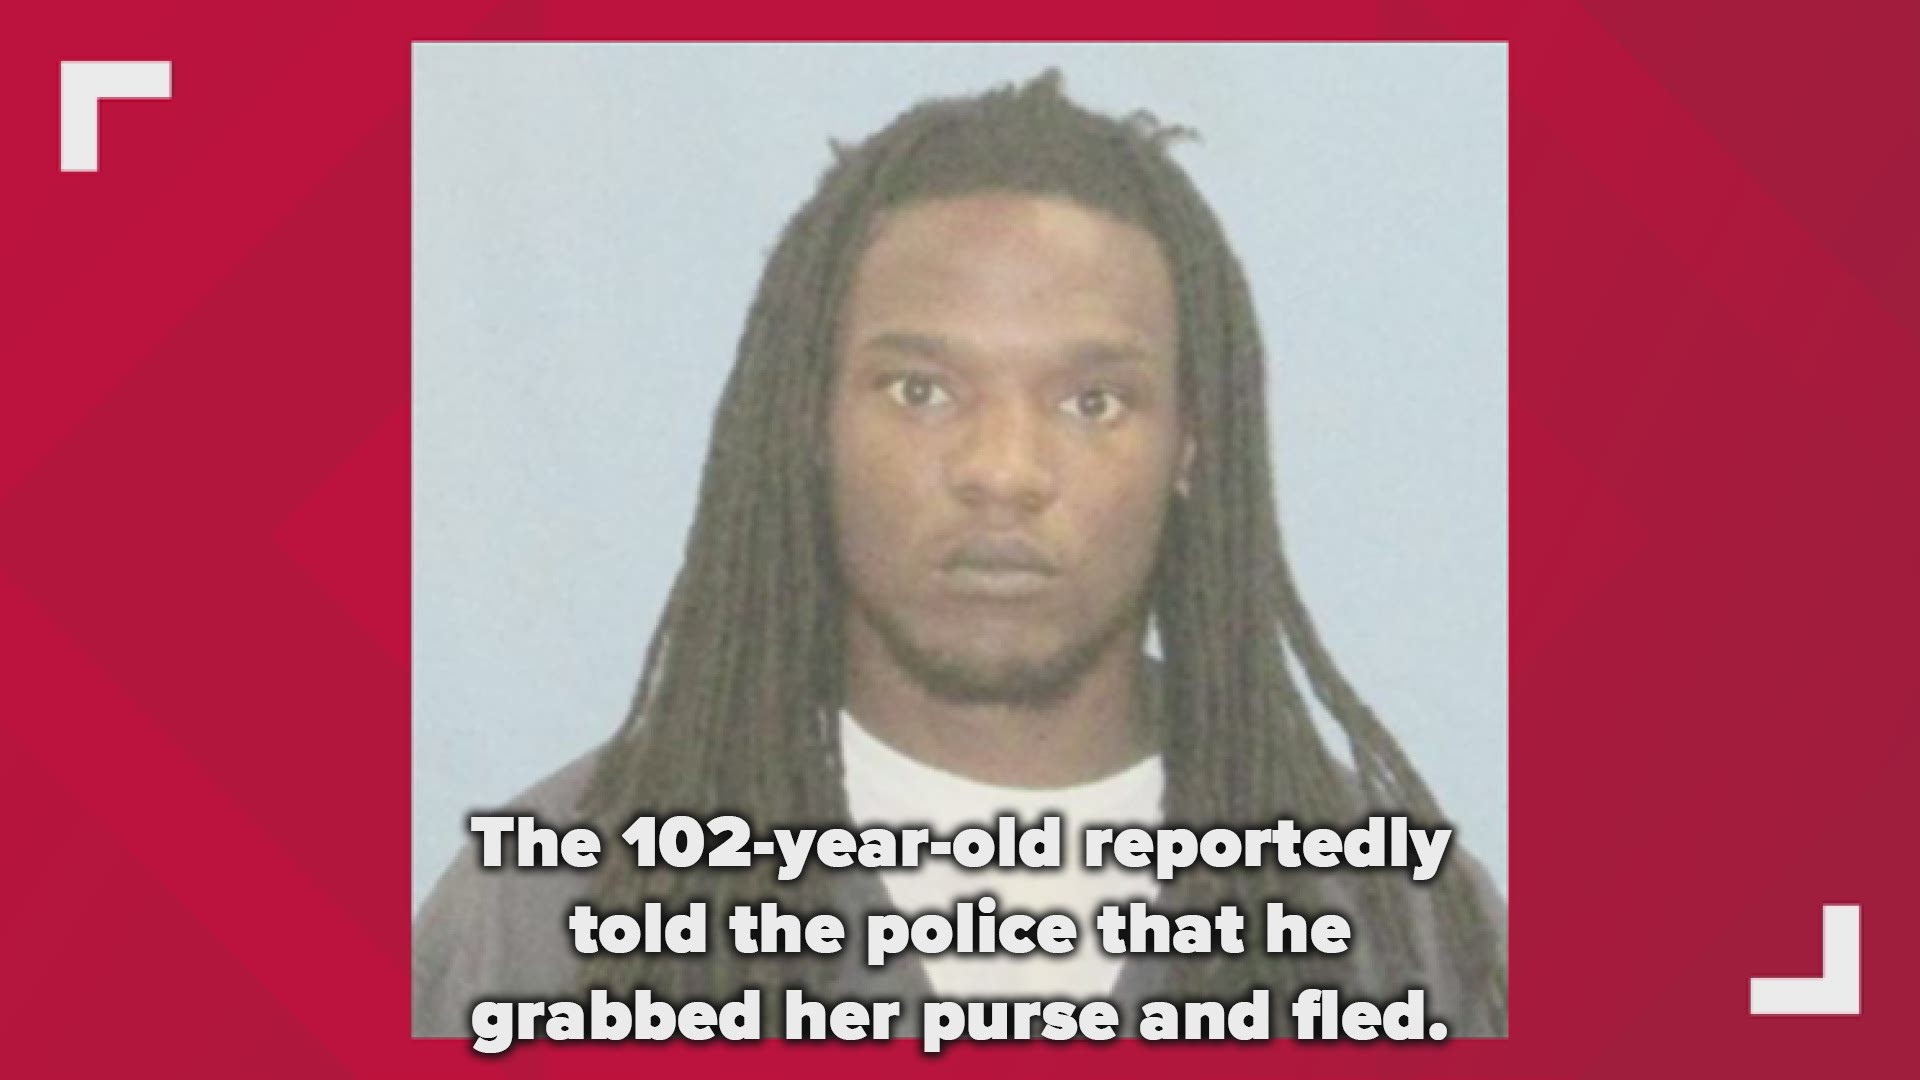 The 102-year-old reportedly told the police he grabbed her purse and fled.